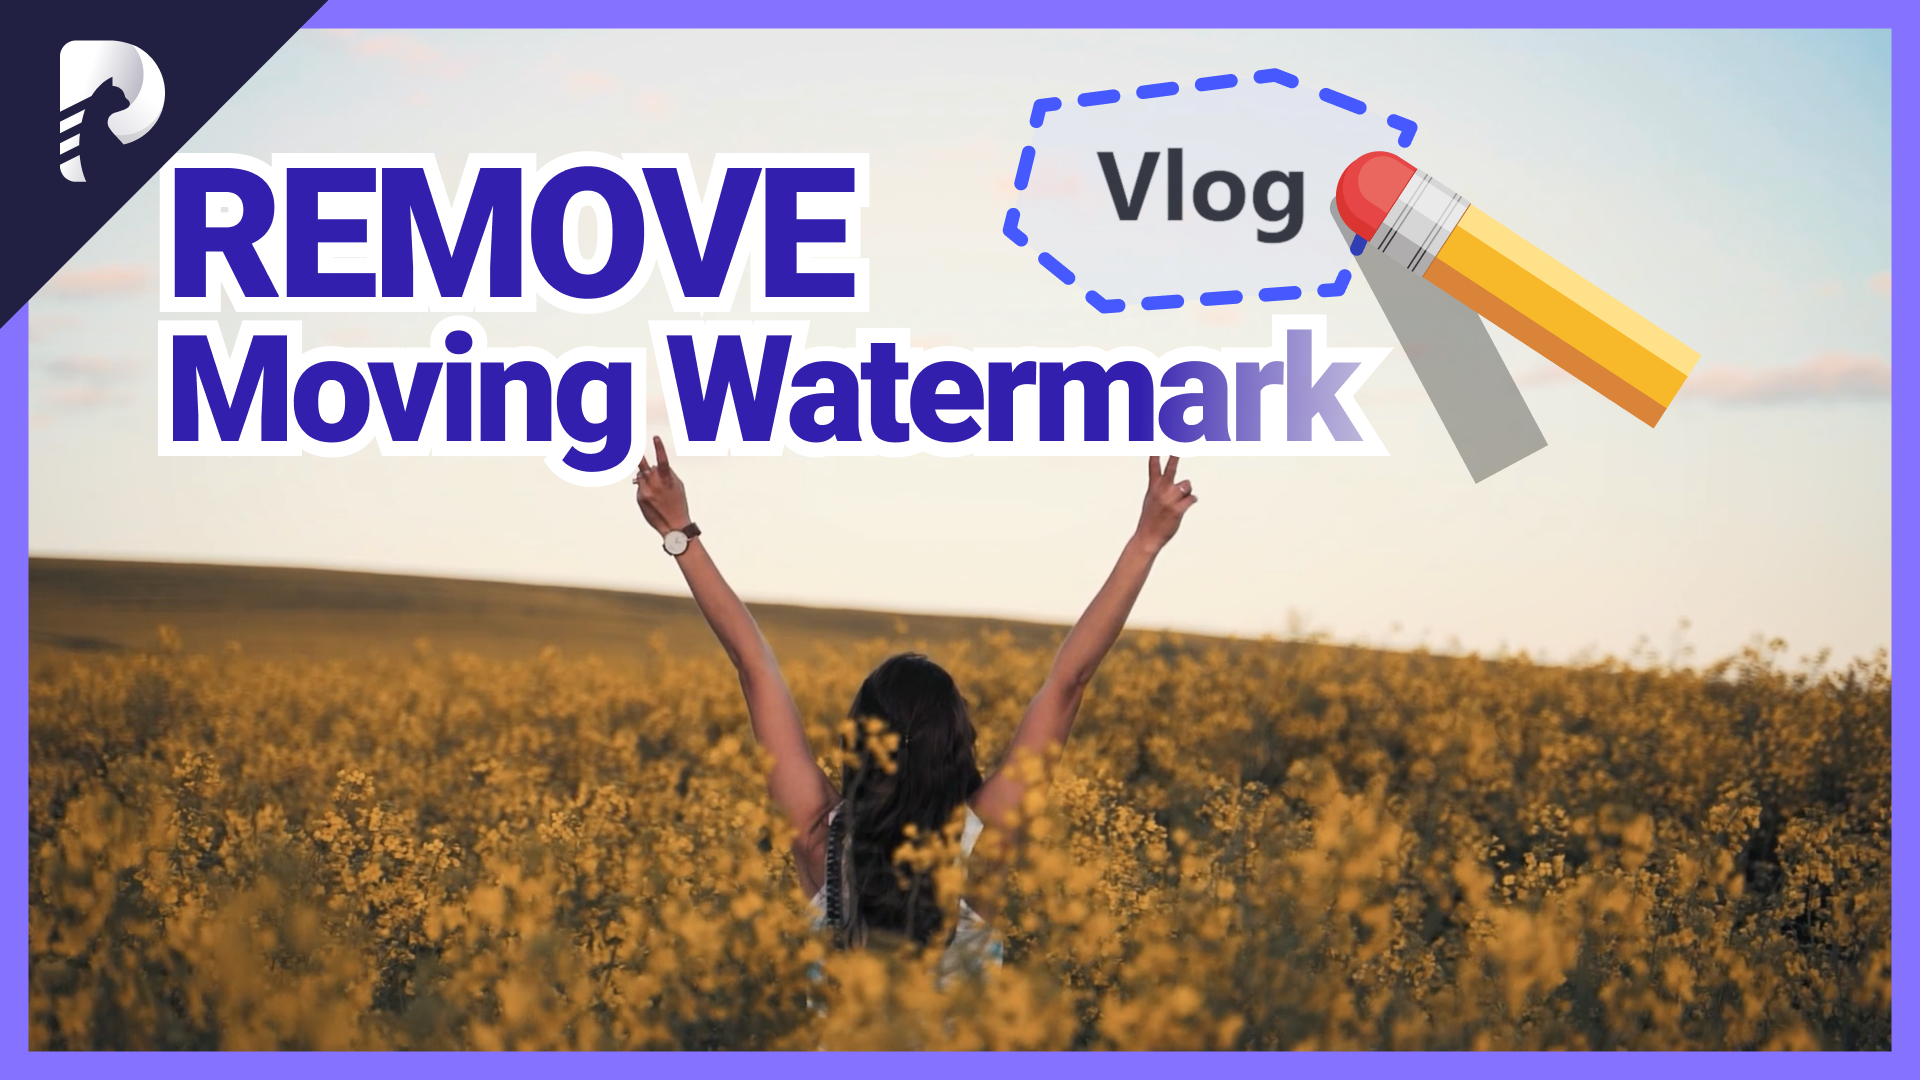 How to Remove Moving Watermark from Video with HitPaw Watermark Remover